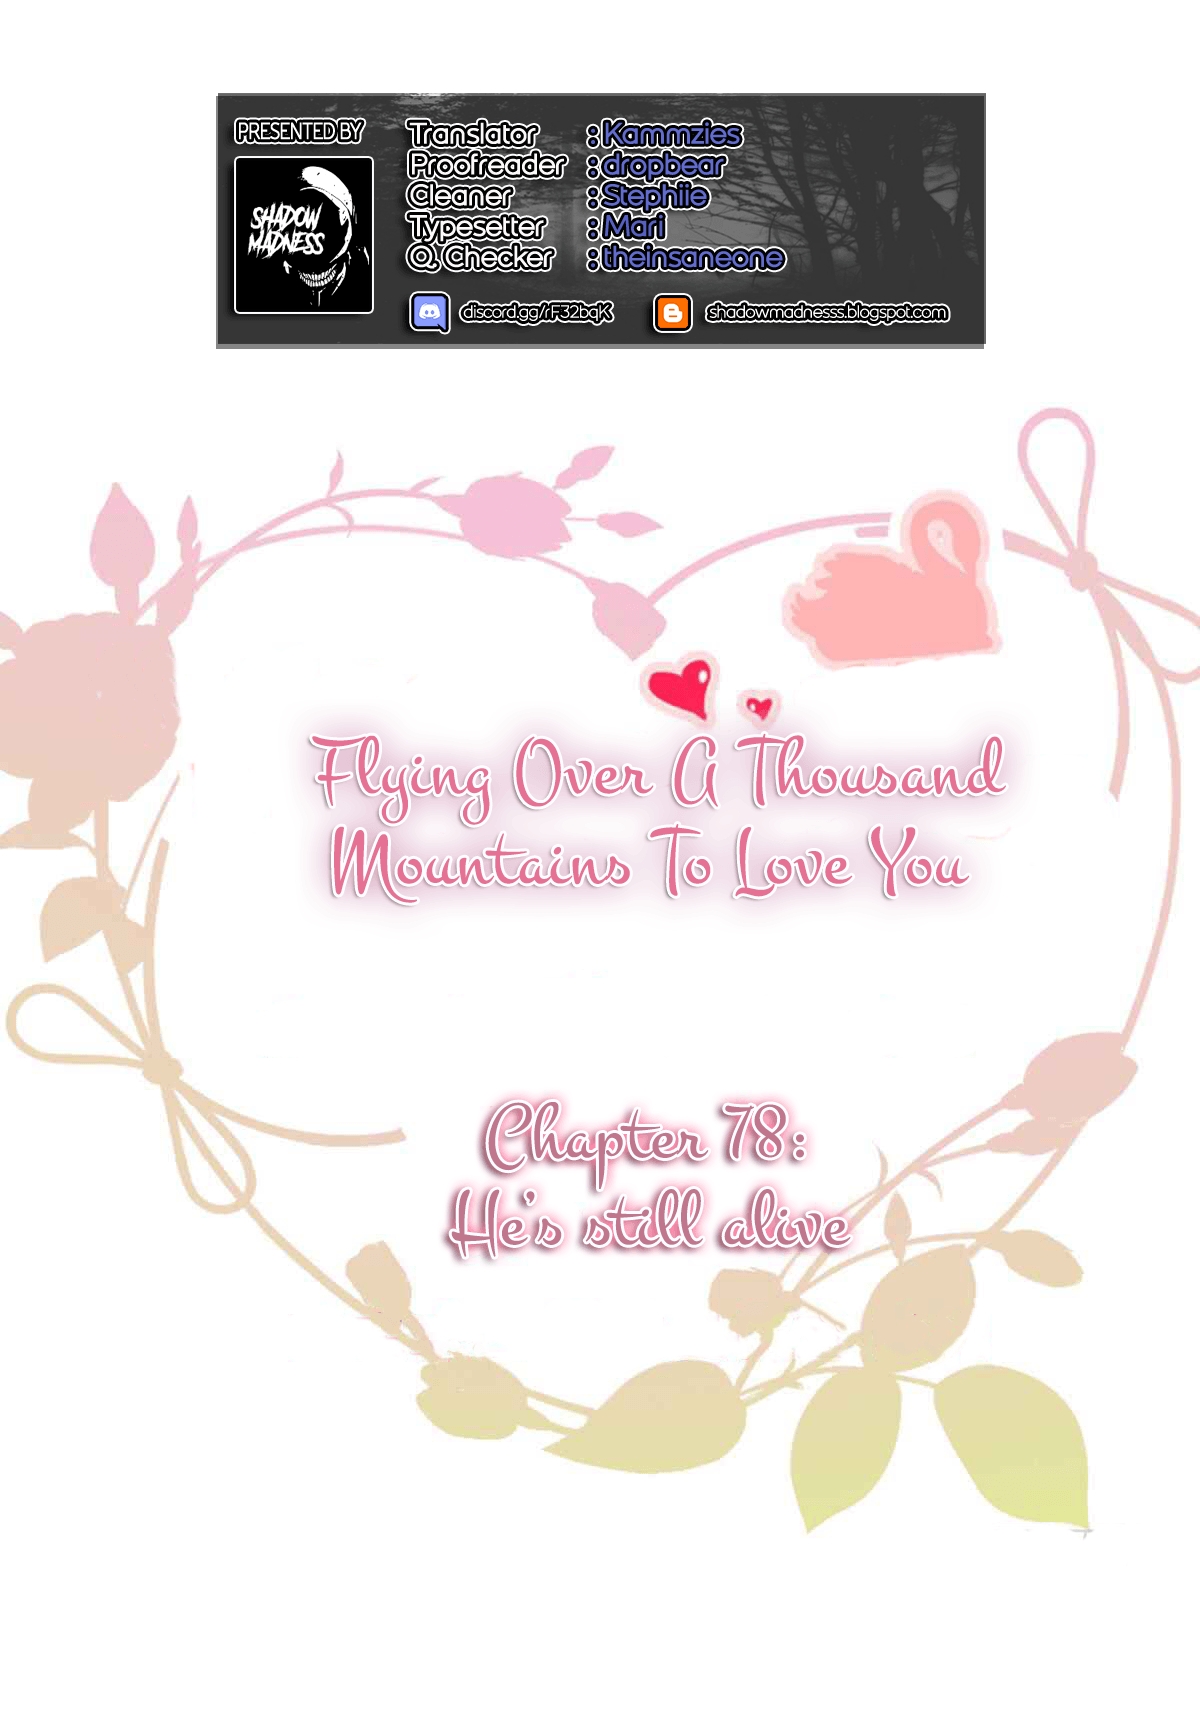 Flying Over a Thousand Mountains to Love You Ch. 78 He's alive